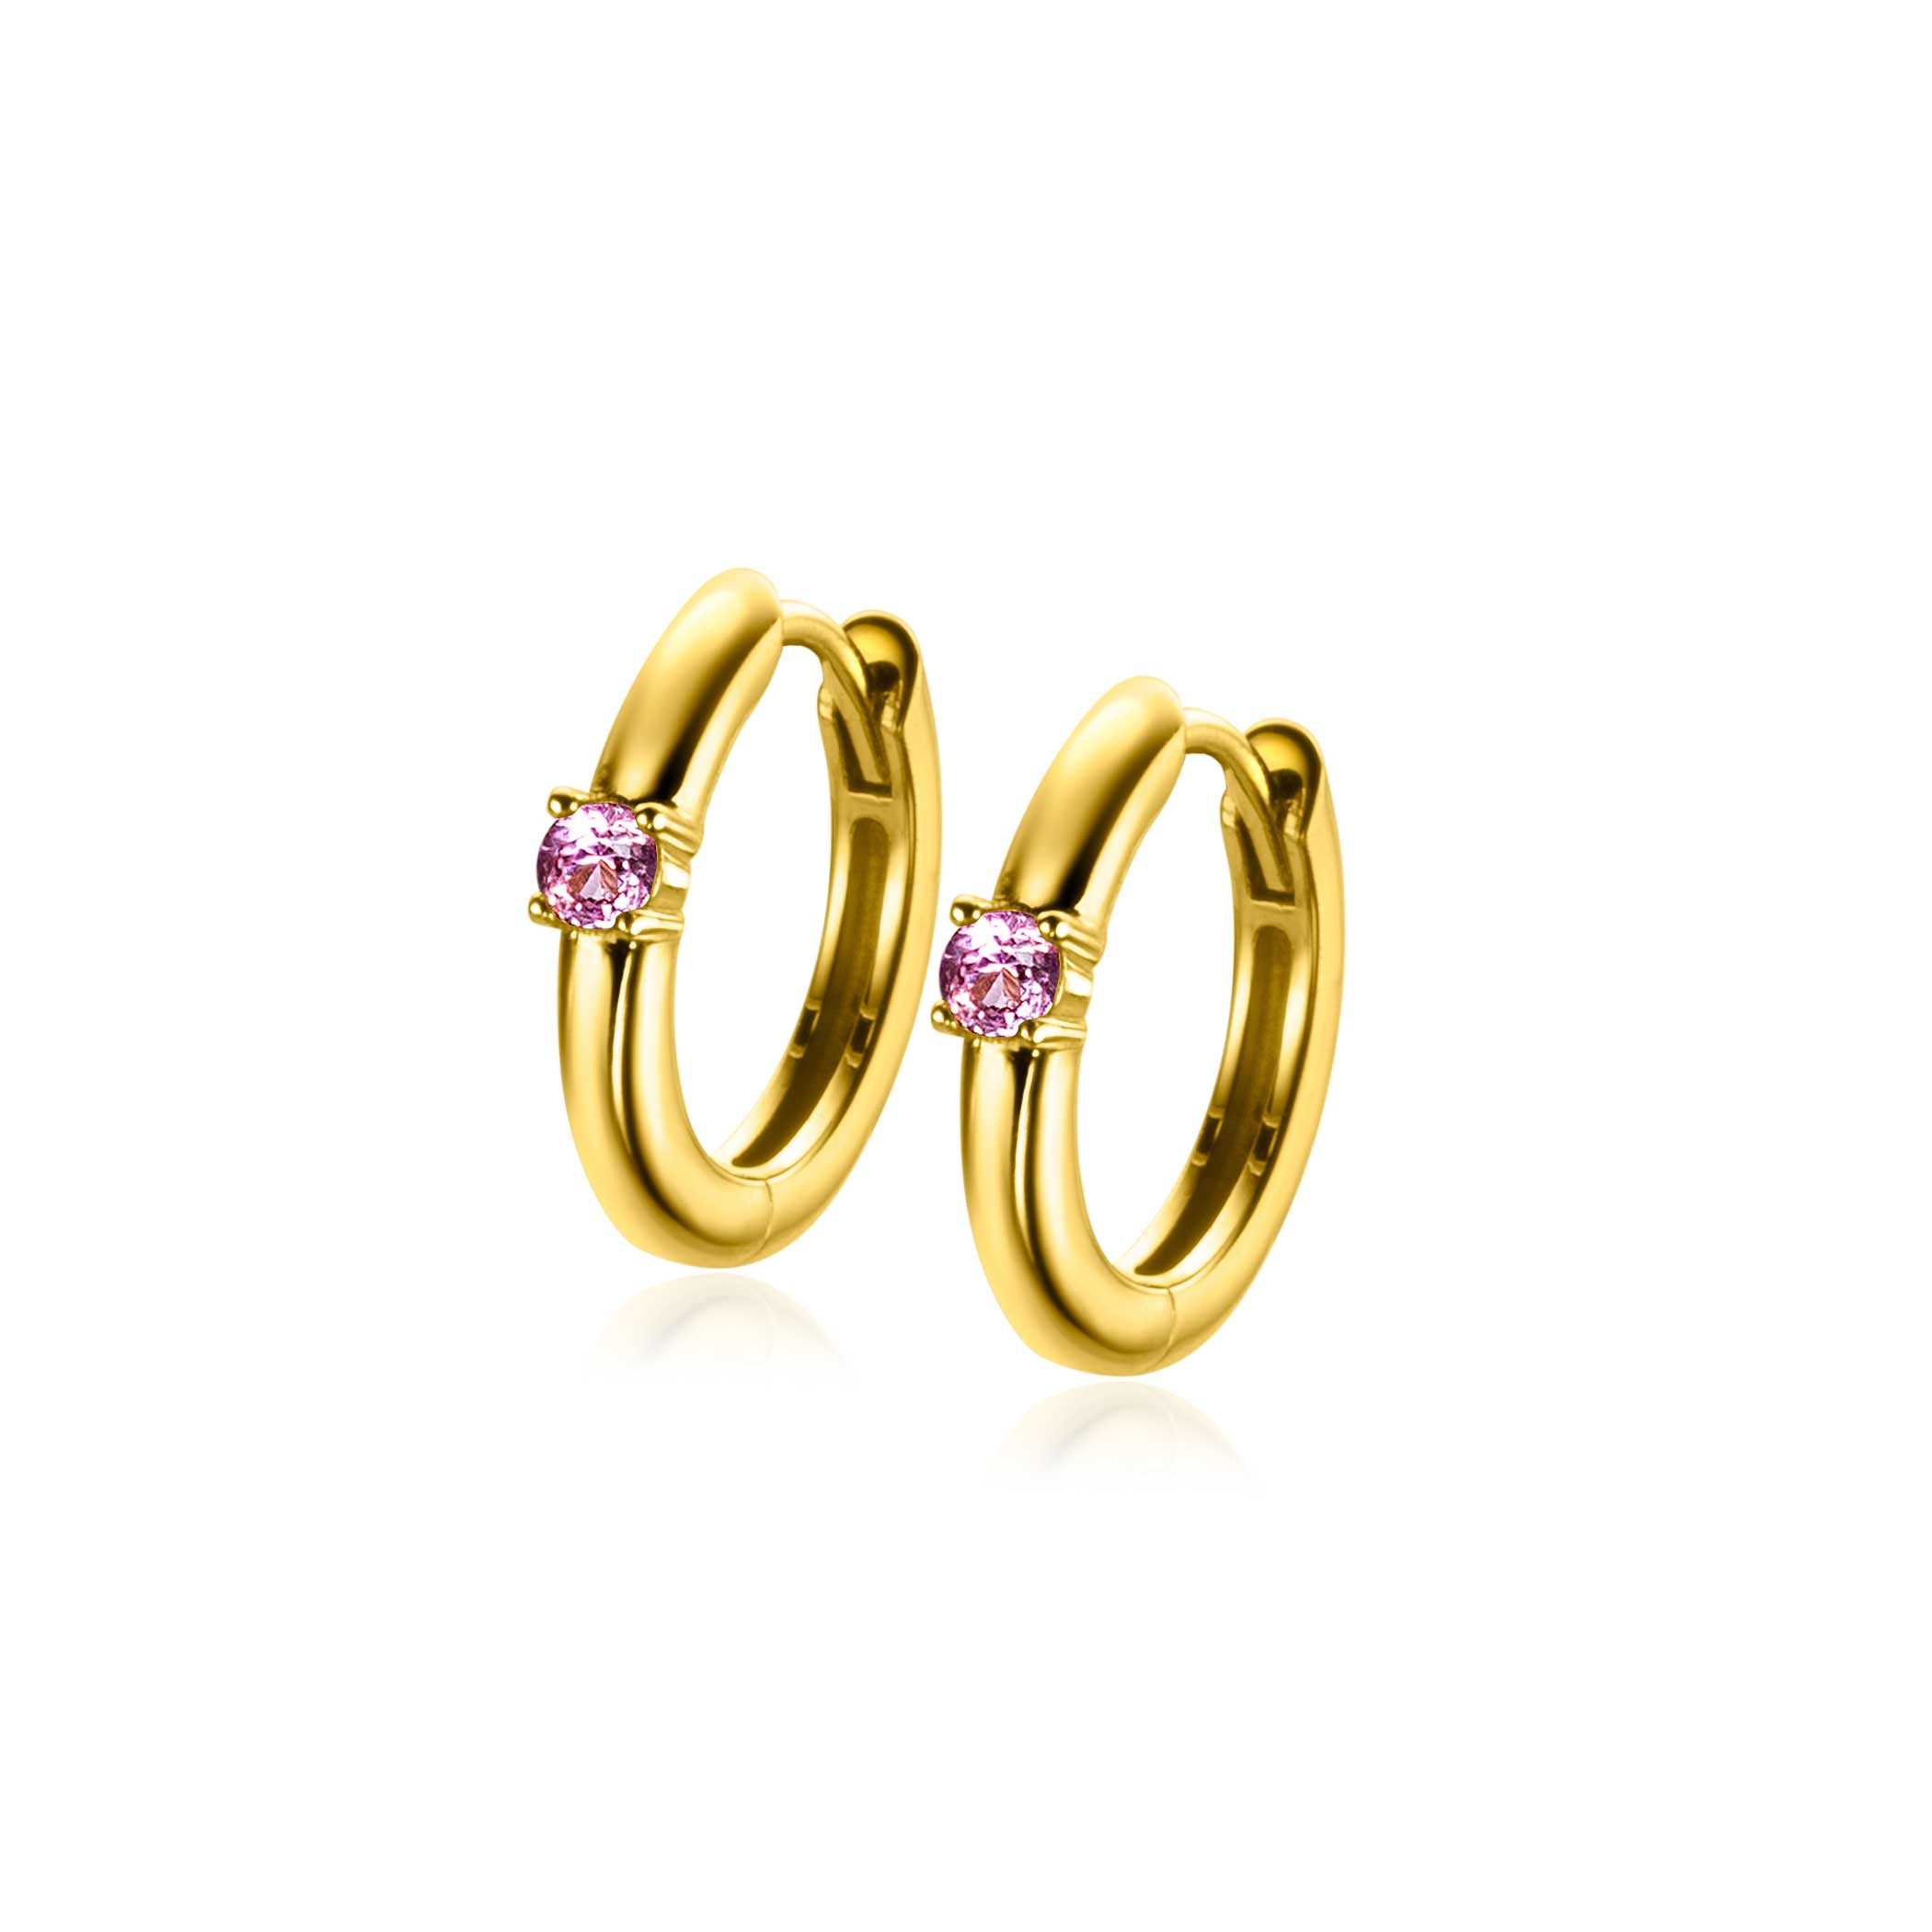 OCTOBER Hoop Earrings 13mm Gold Plated with Birthstone Pink Rose Quartz Zirconia